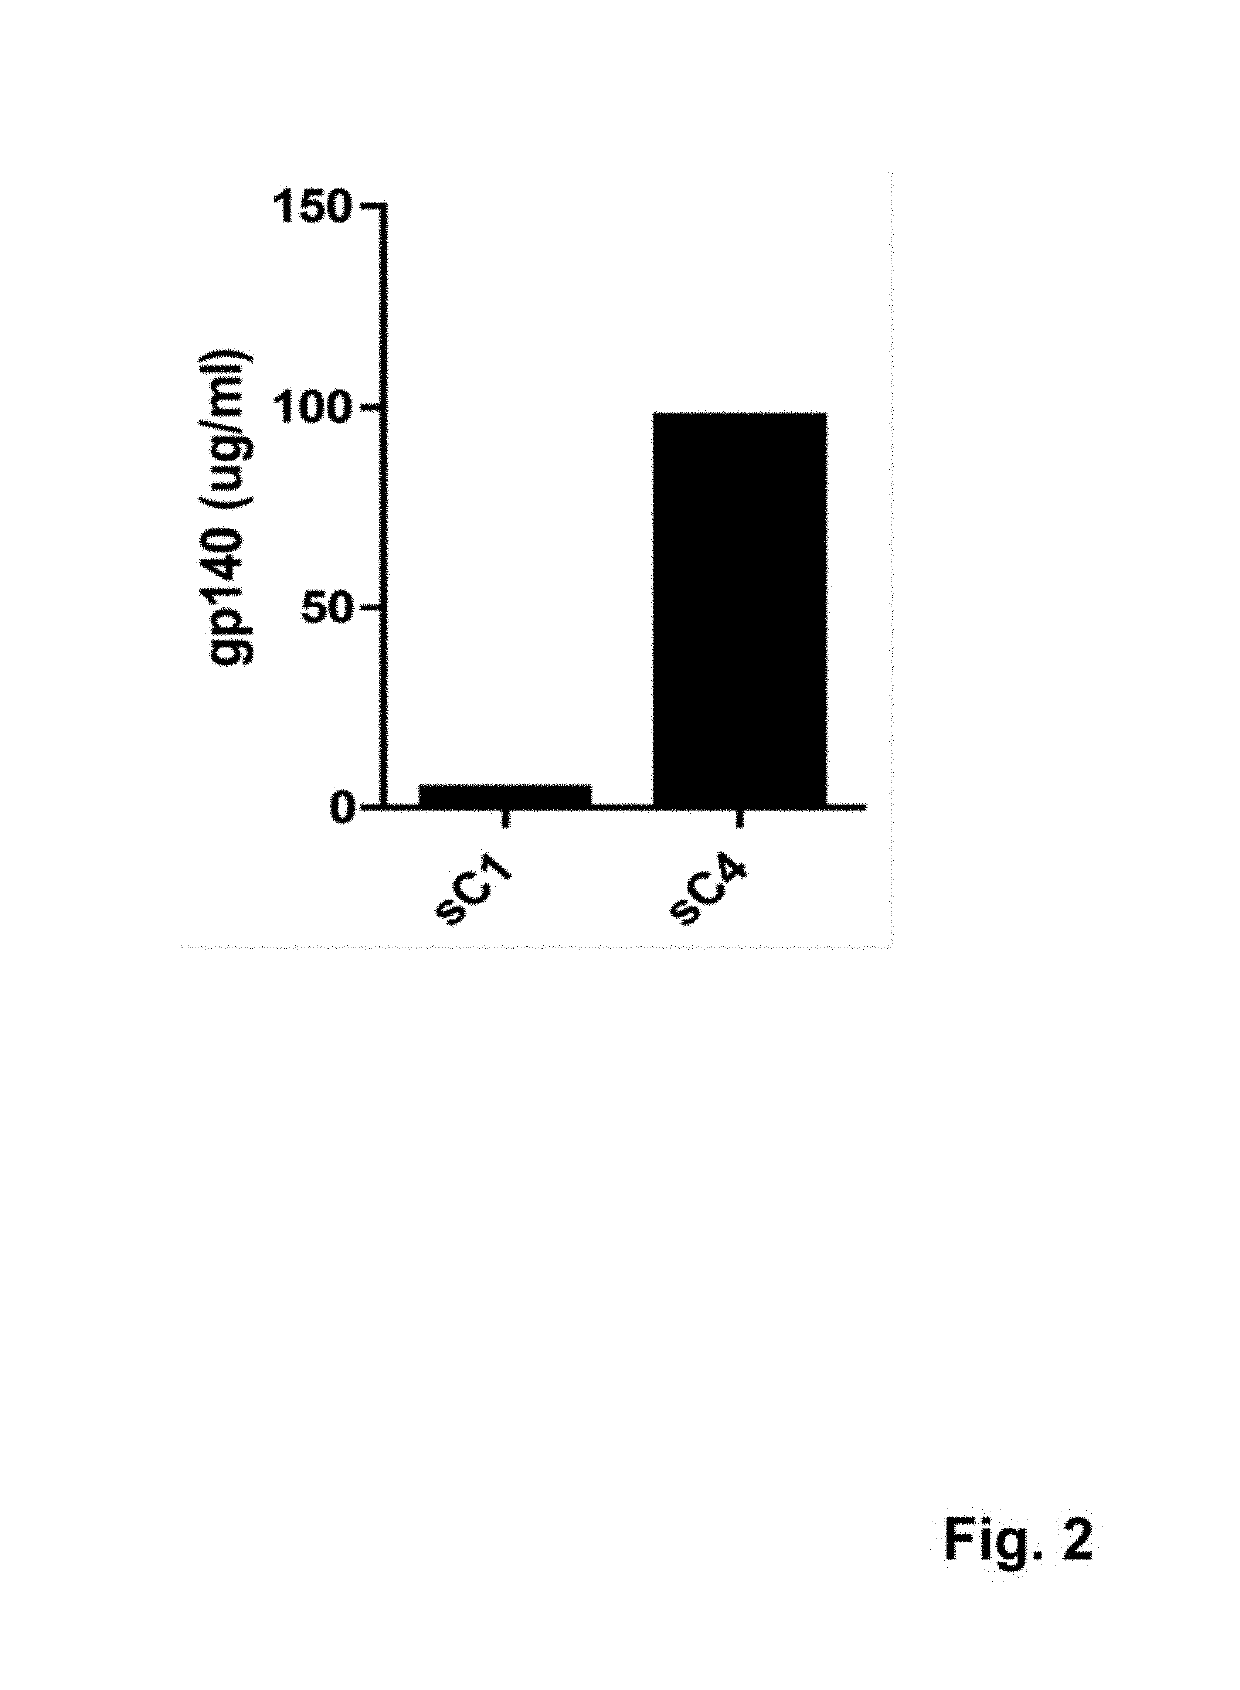 Synthetic human immunodeficiency virus (HIV) envelope antigen, vectors, and compositions thereof